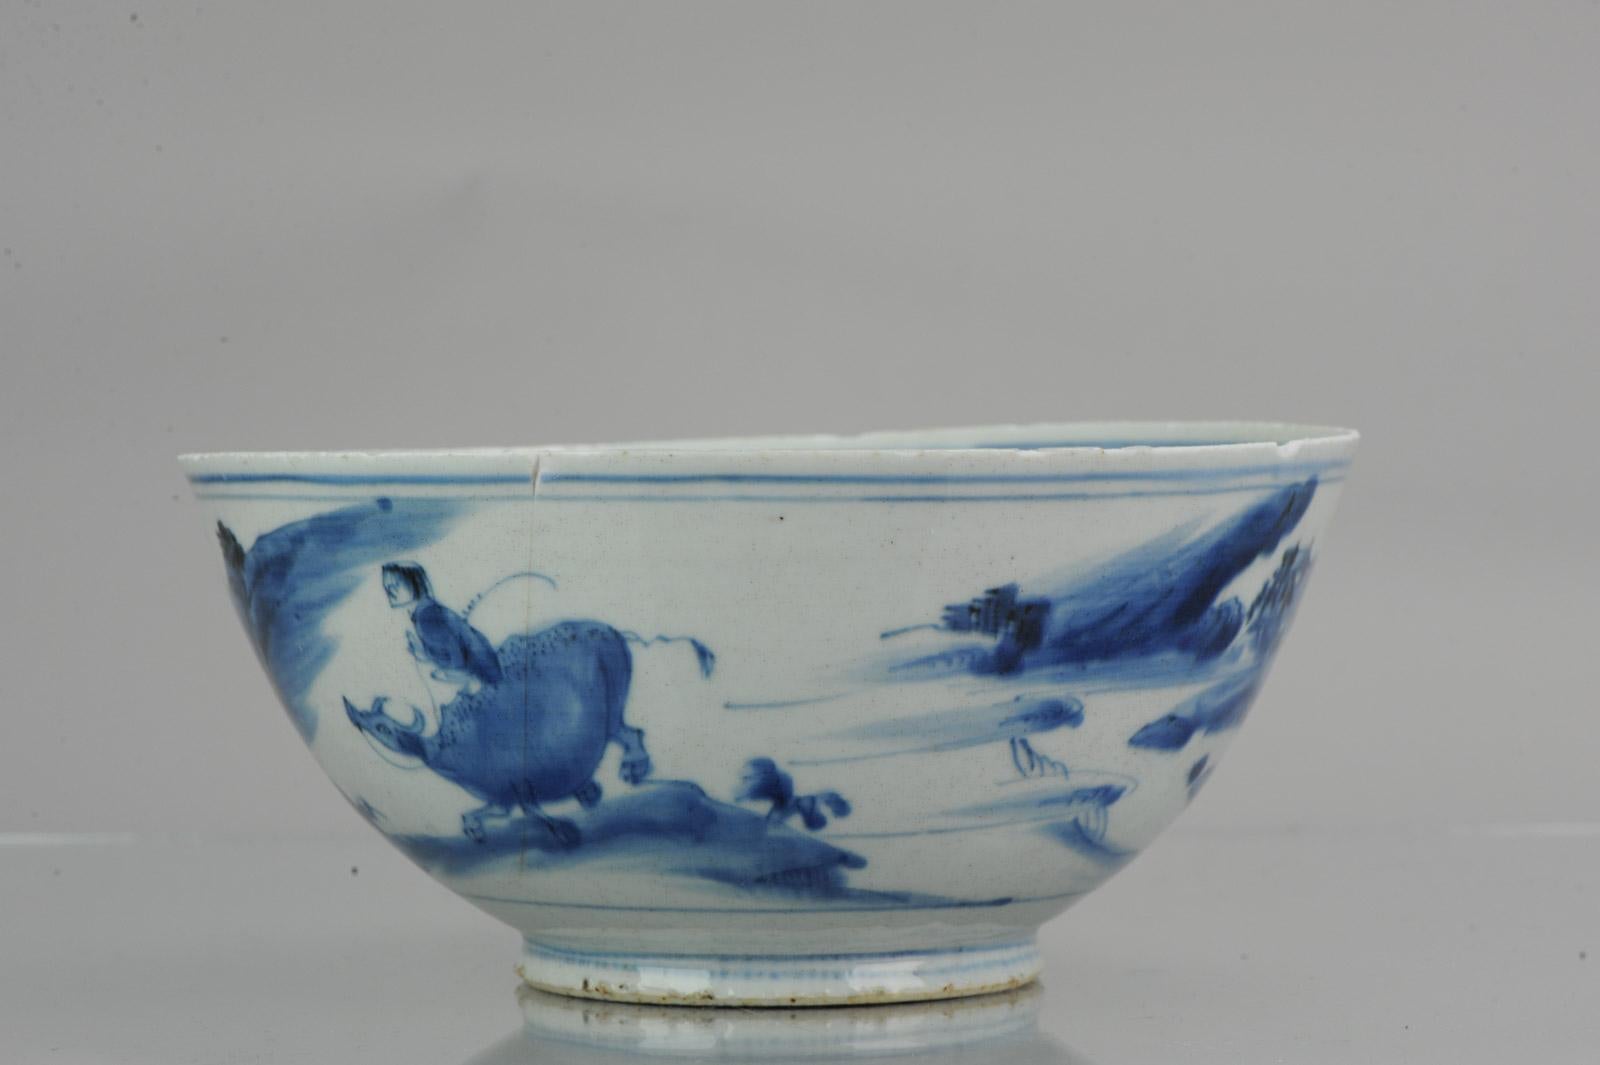 A very nice bowl from the Ming period. Chenghua marked.

Ox herdboys riding oxen have been used as a motif in painting and graphic arts to symbolize the ability of the mind to control the body. That is, philosophically, symbolizing the ability of